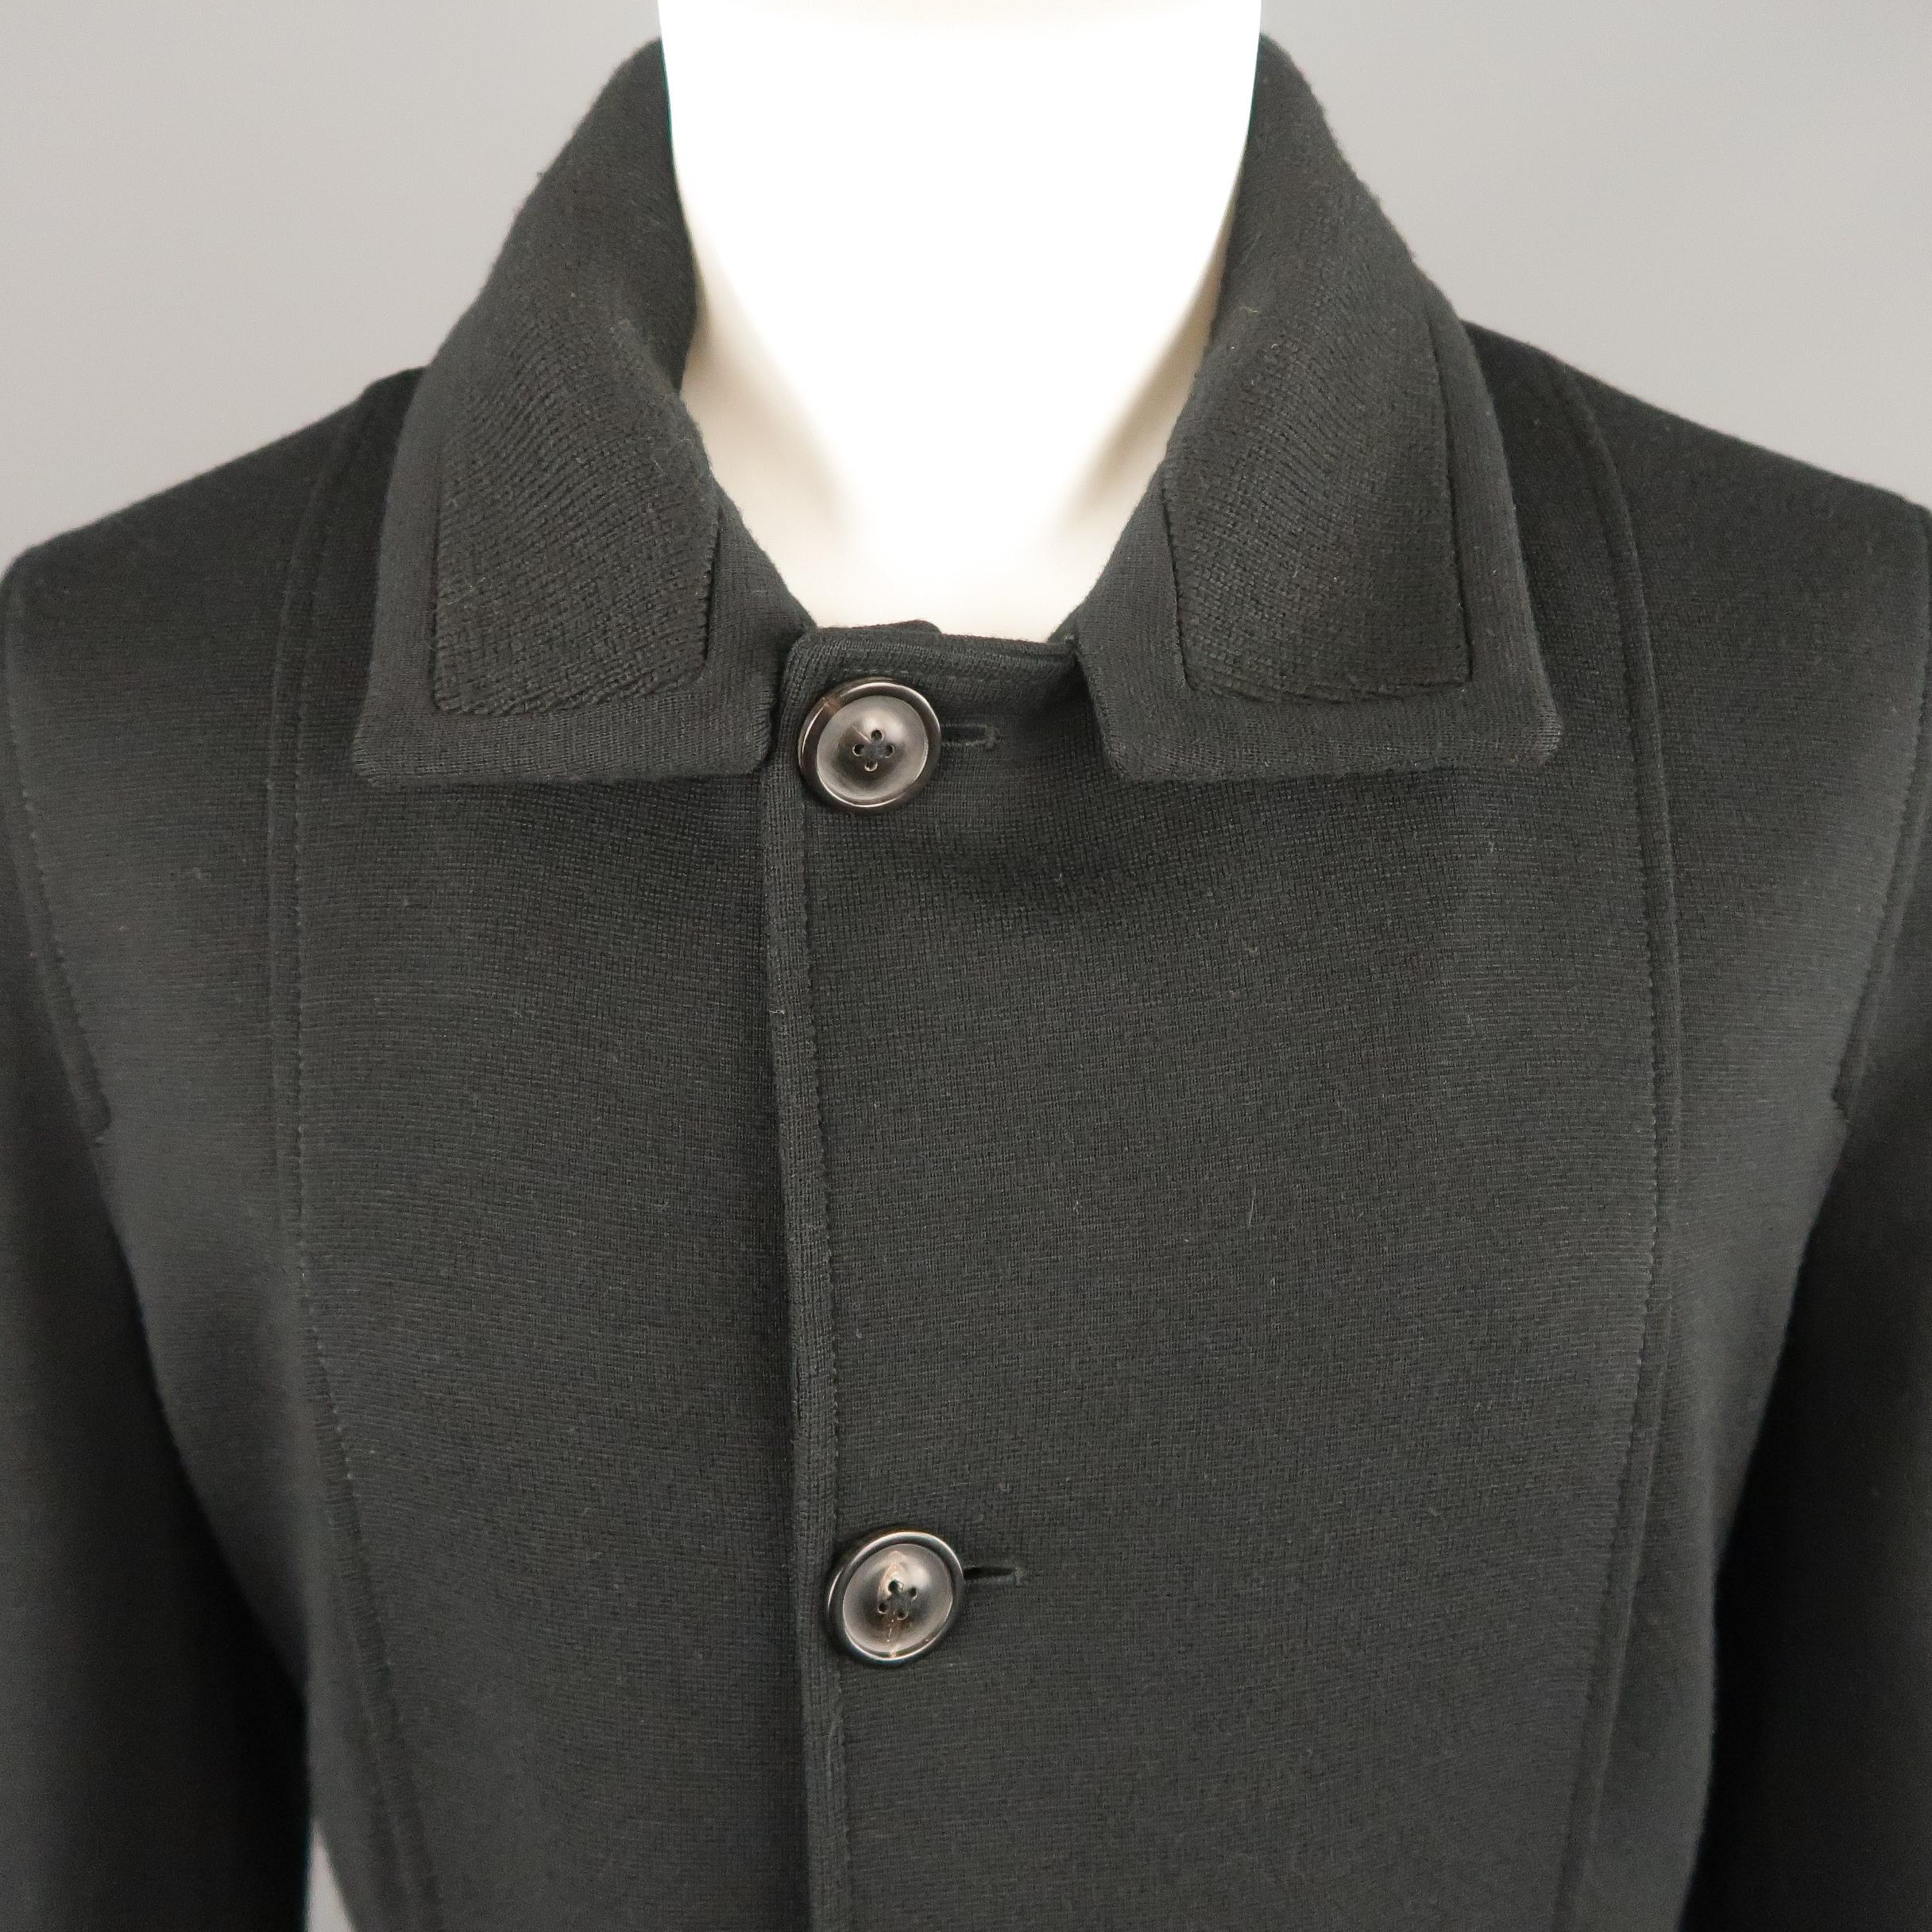 MAISON MARTIN MARGIELA coat comes in black wool blend knit with a textured spread  collar, single breasted button up front, slit chest pockets, and geometric side pockets. Made in Italy.
 
Excellent Pre-Owned Condition.
Marked: IT 50
